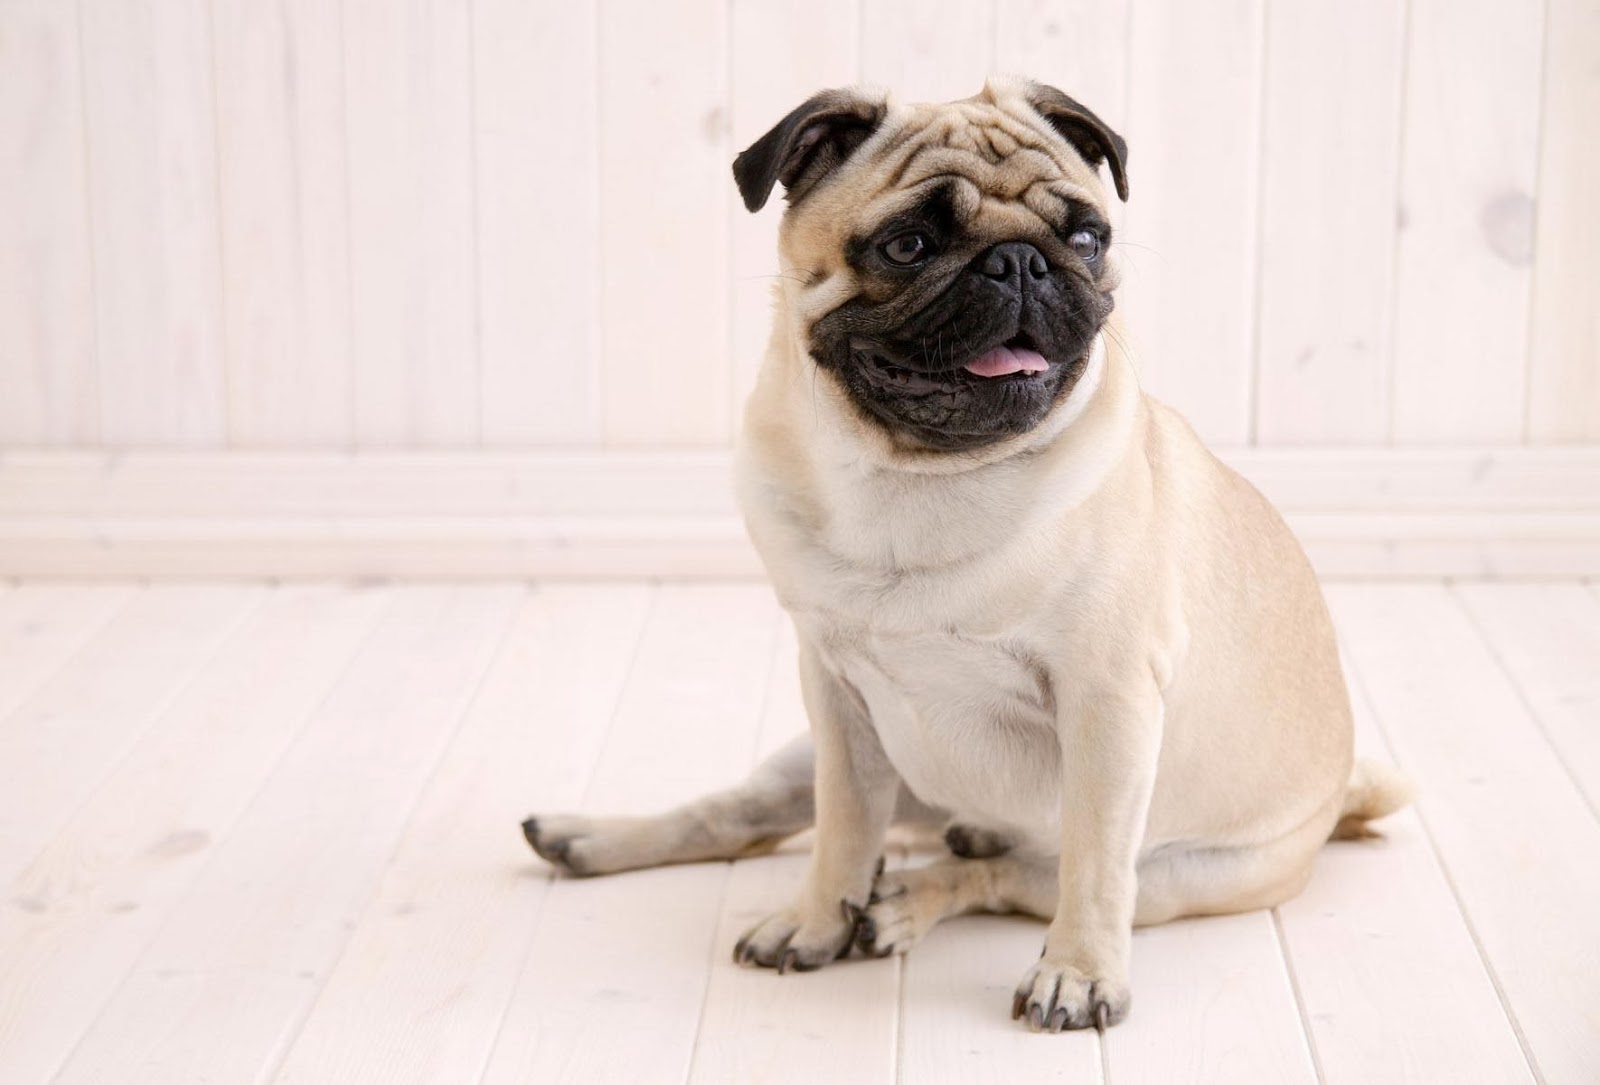 Pug Dog Latest HD Wallpapers 2013 | Beautiful And Dangerous Animals